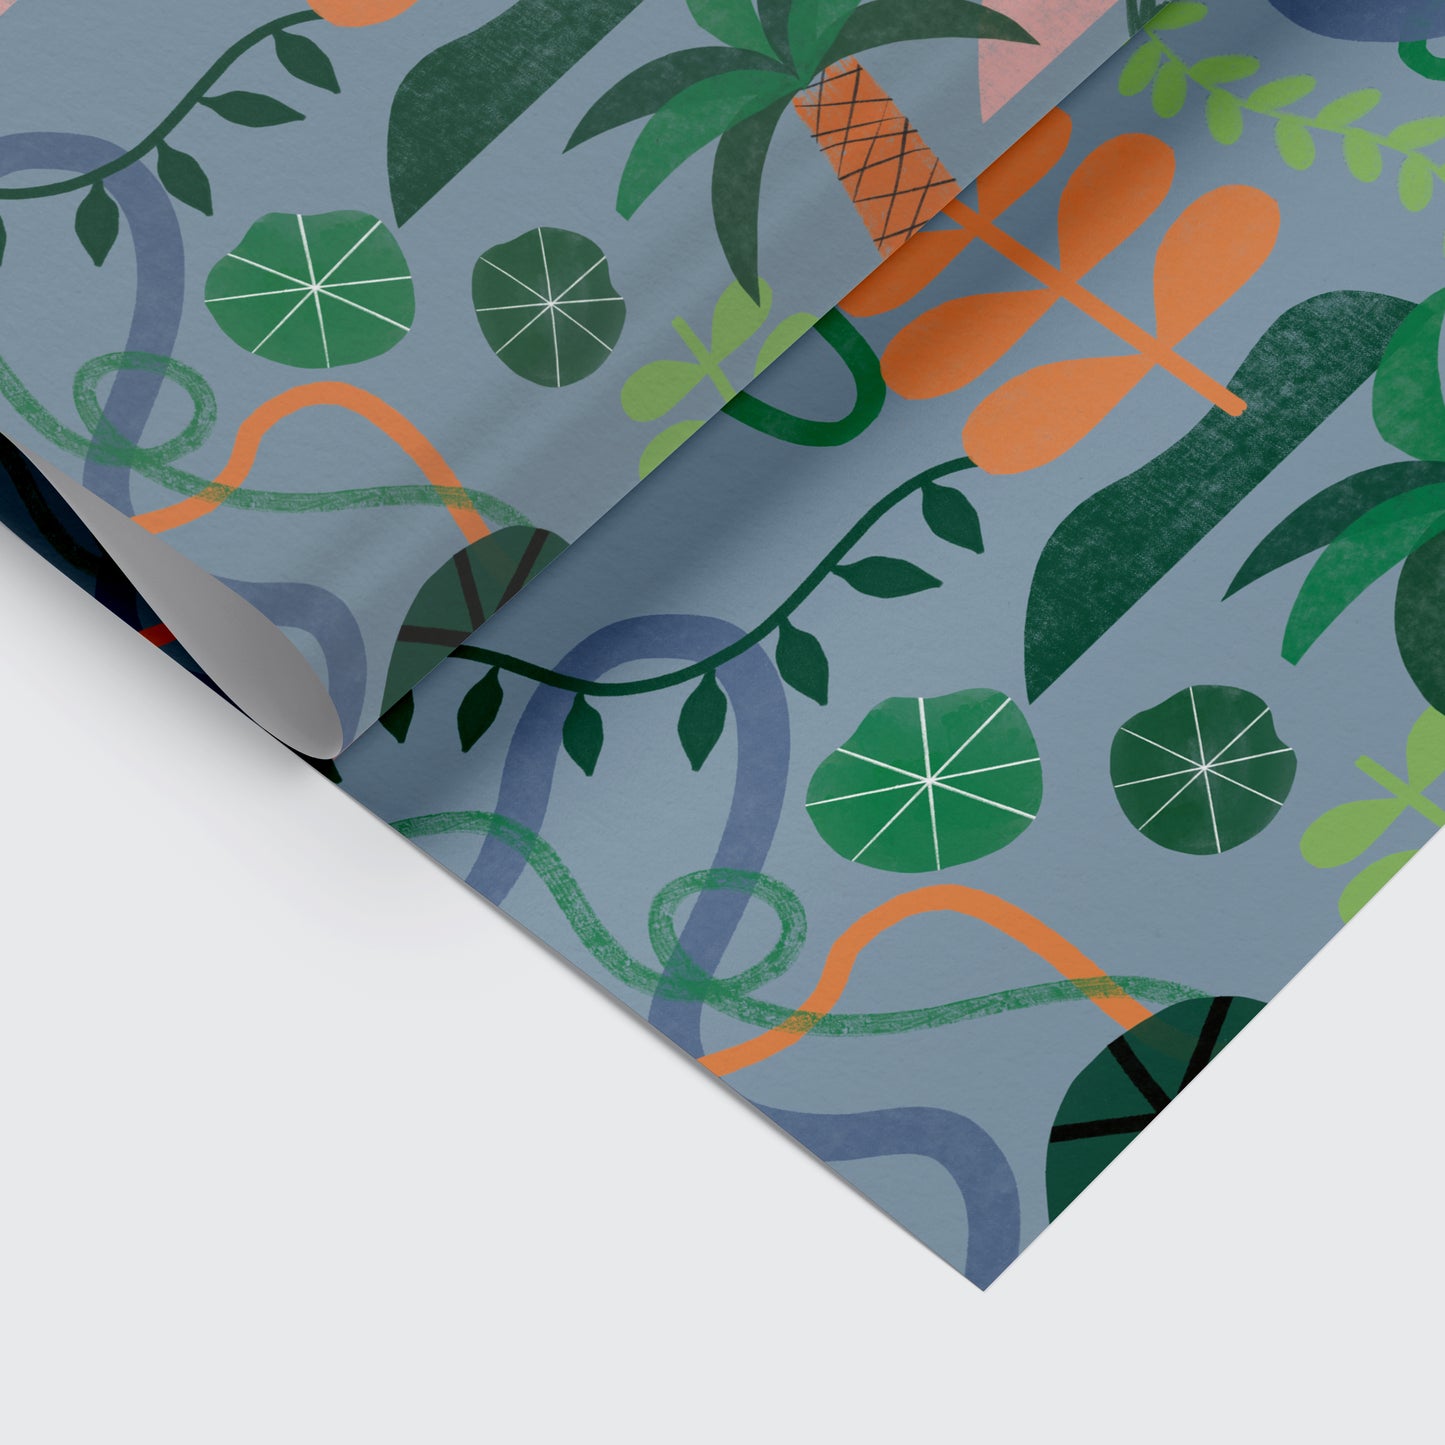 wrapping paper with jungle pattern on it